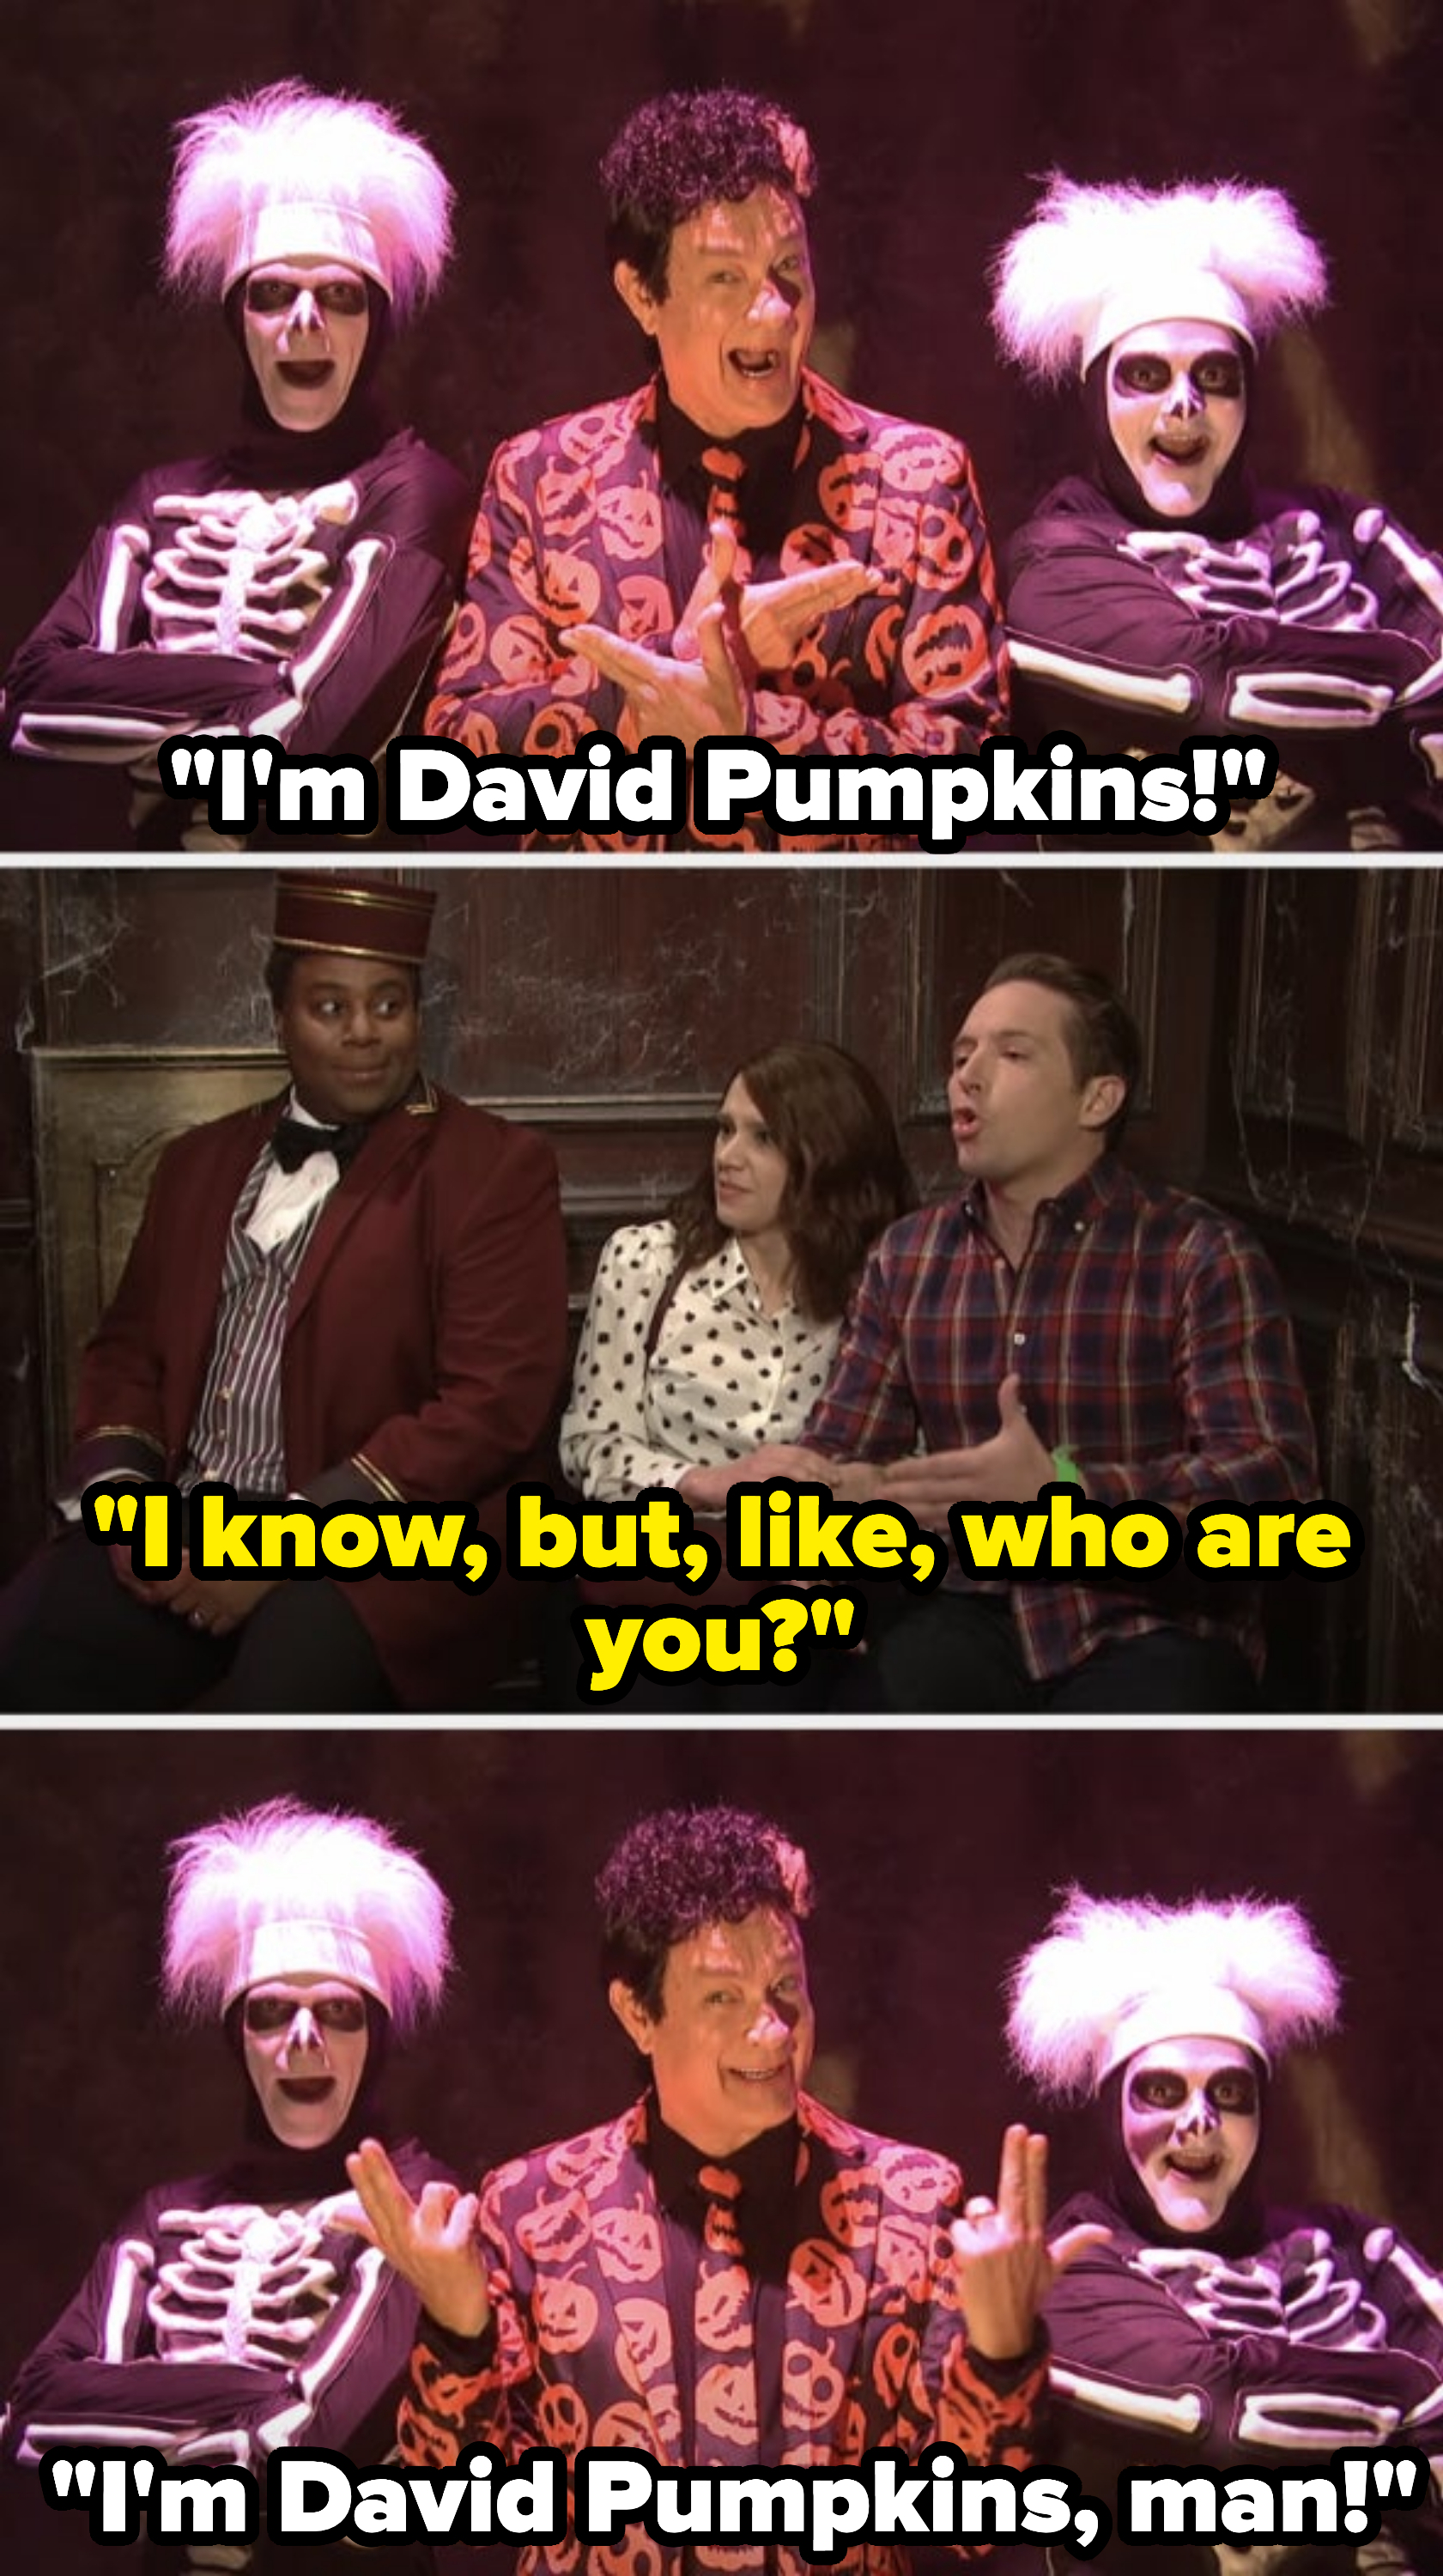 David Pumpkins introduces himself but the guests don&#x27;t know who he is